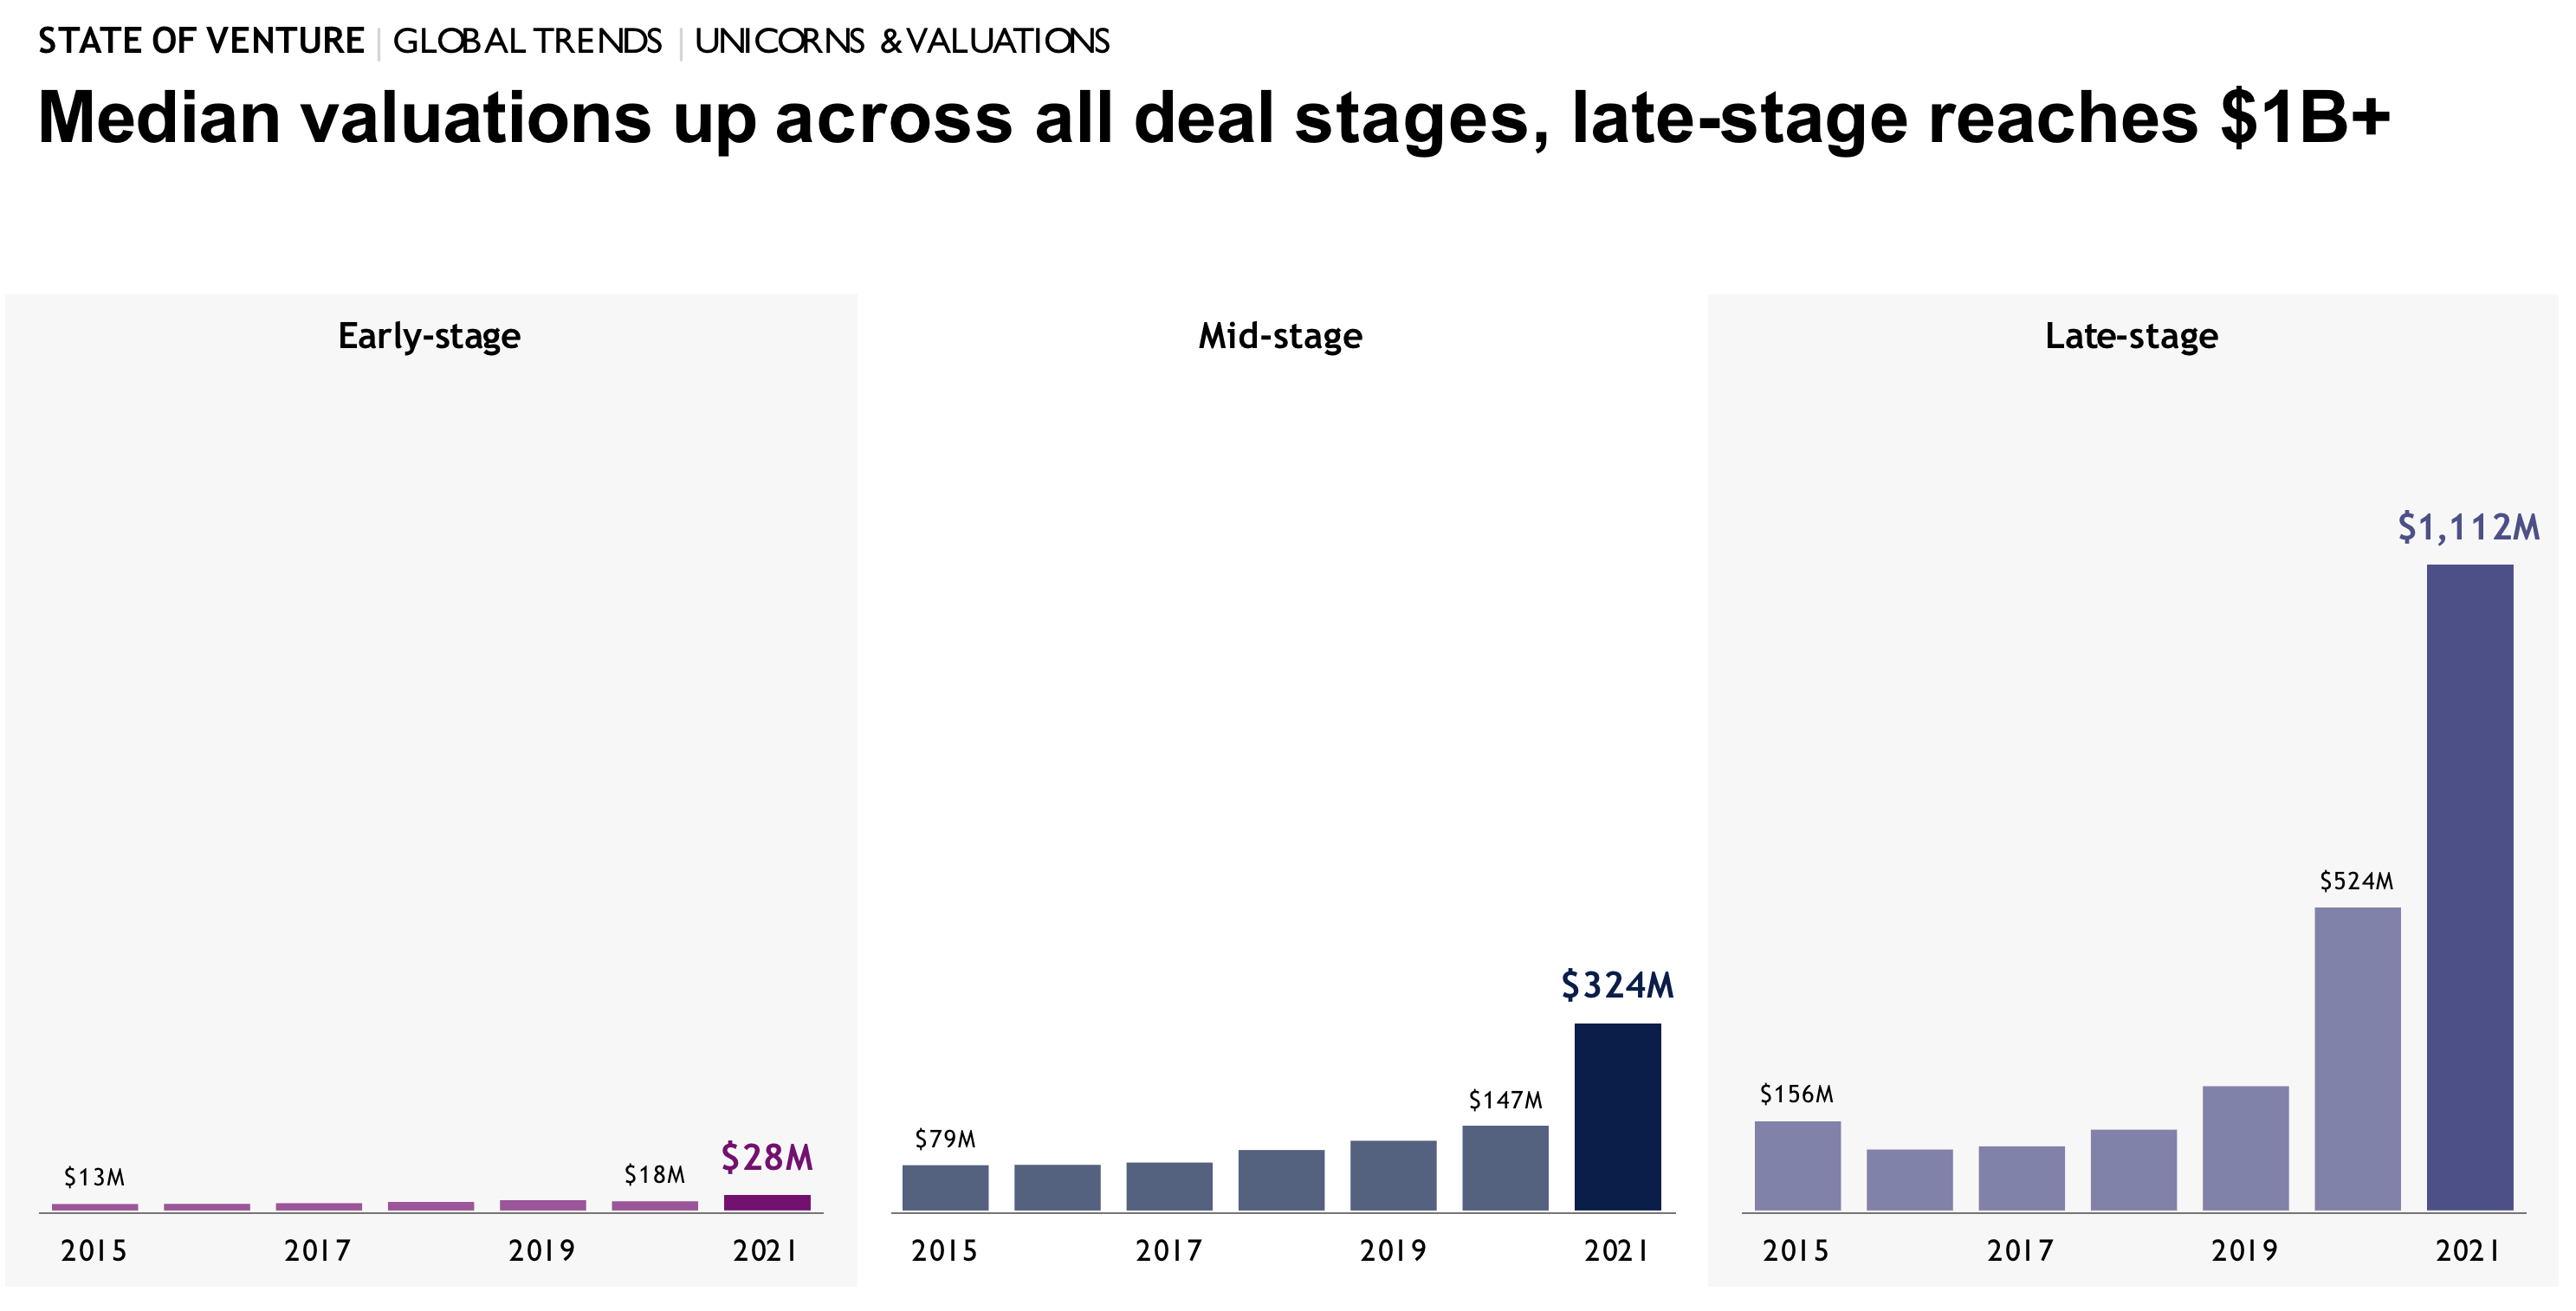 Median valuations up across all deal stages graph